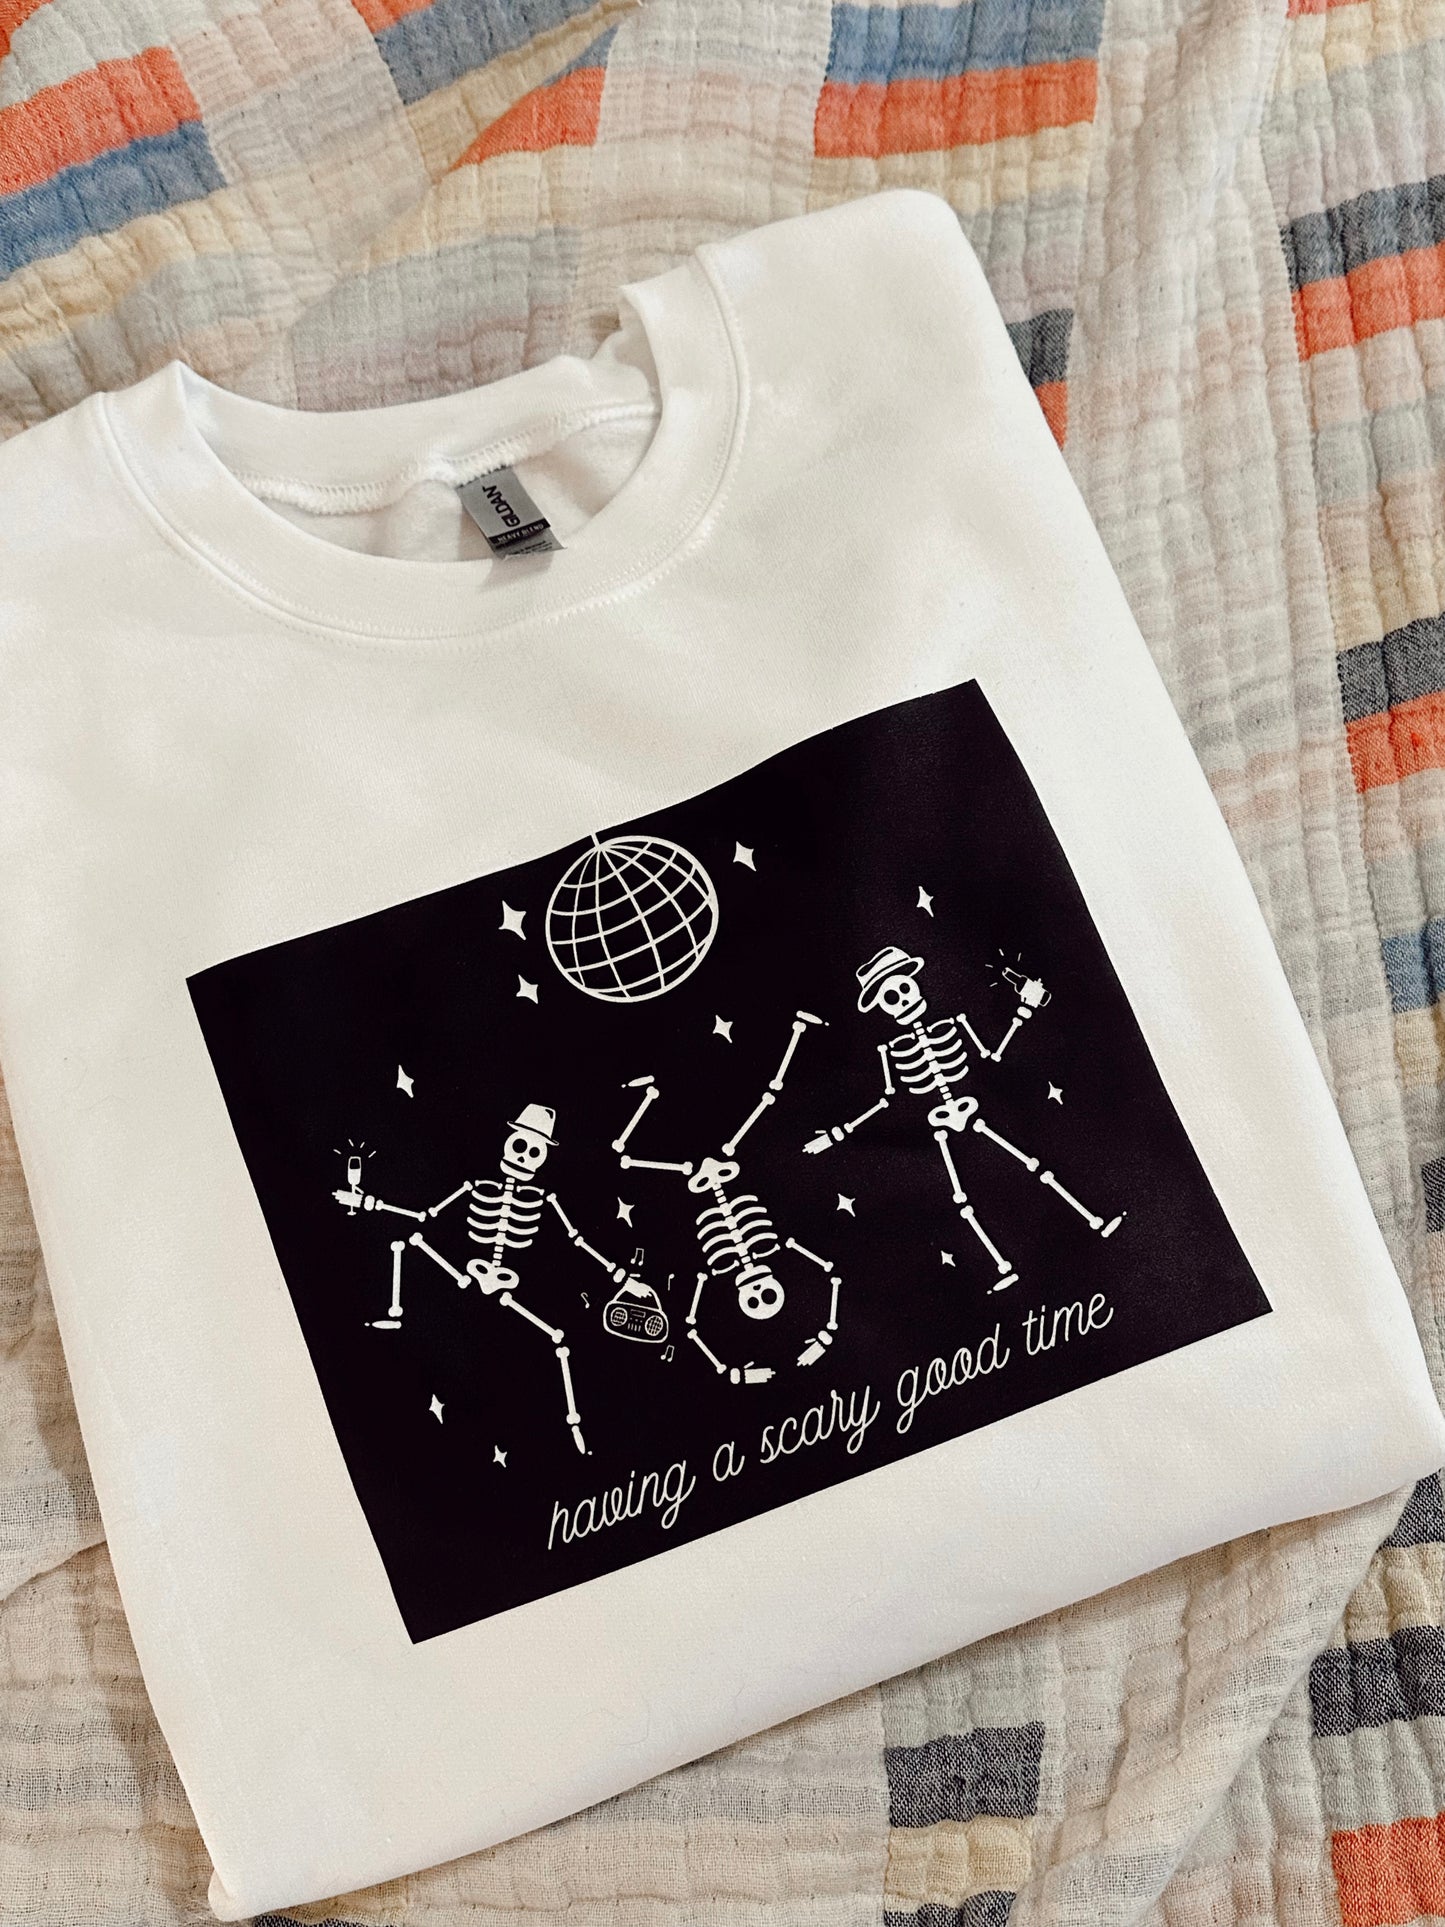 "Having a Scary Good Time" Crew Neck